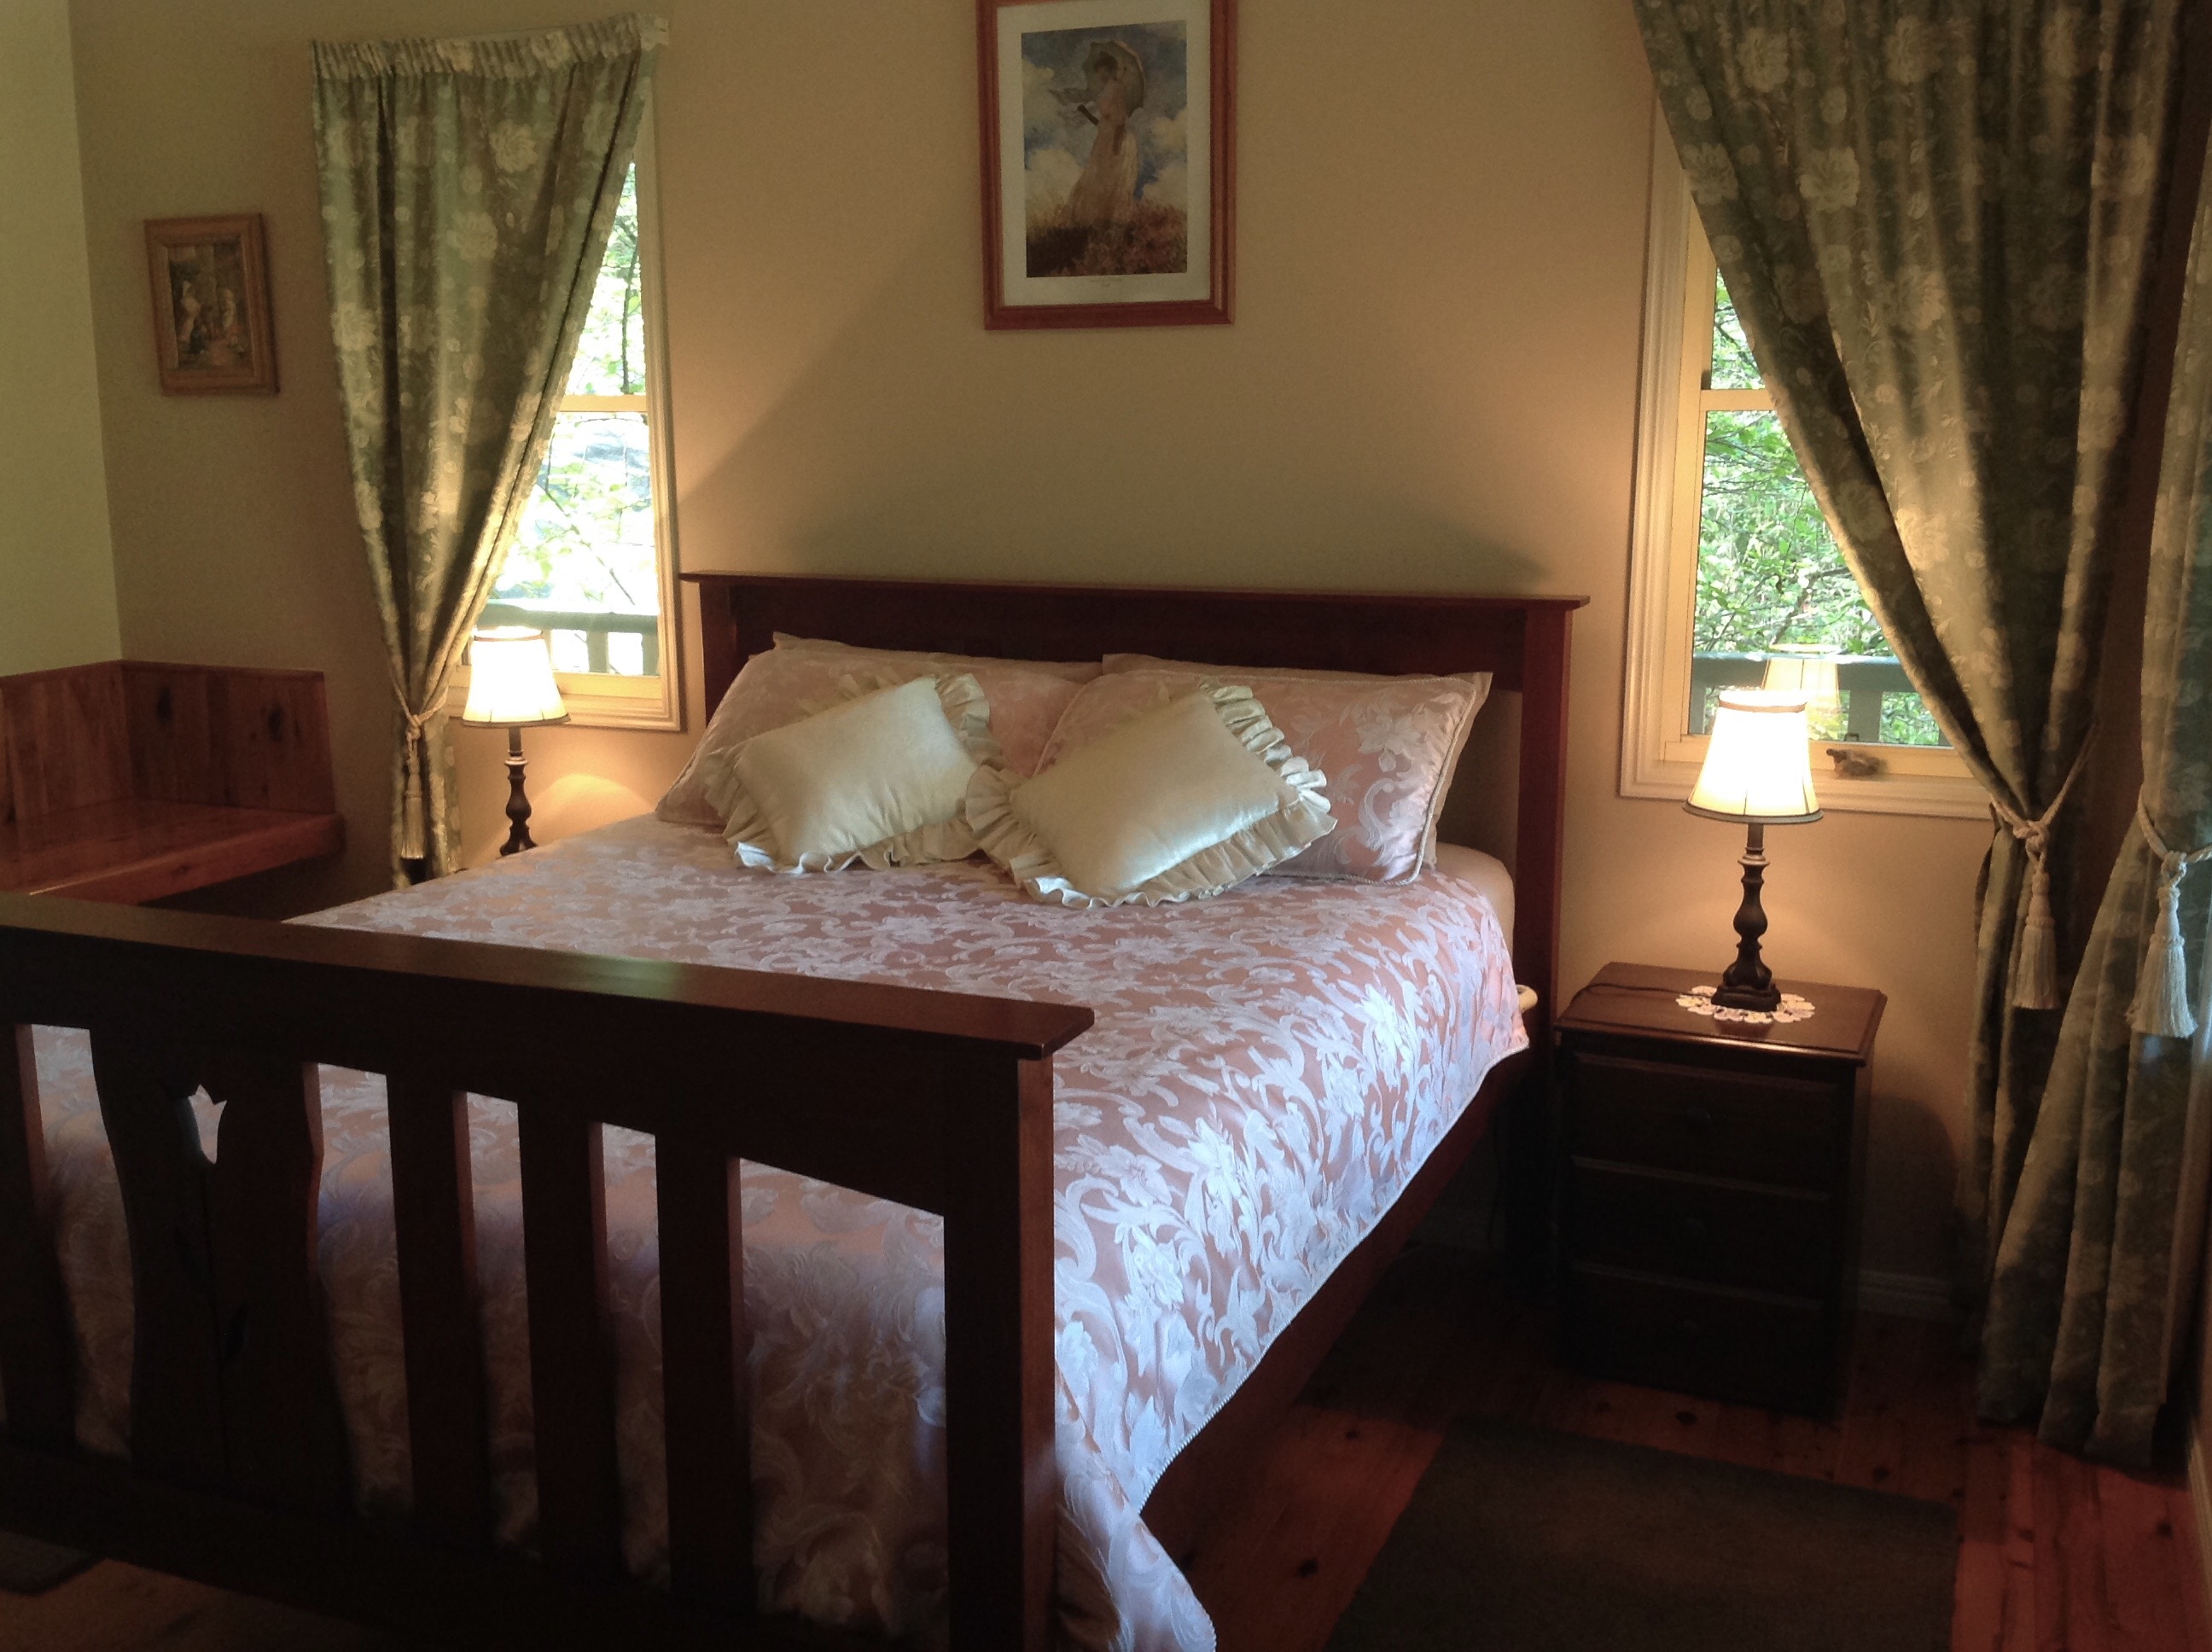 Maleny Country Cottages - Wagga Wagga Accommodation